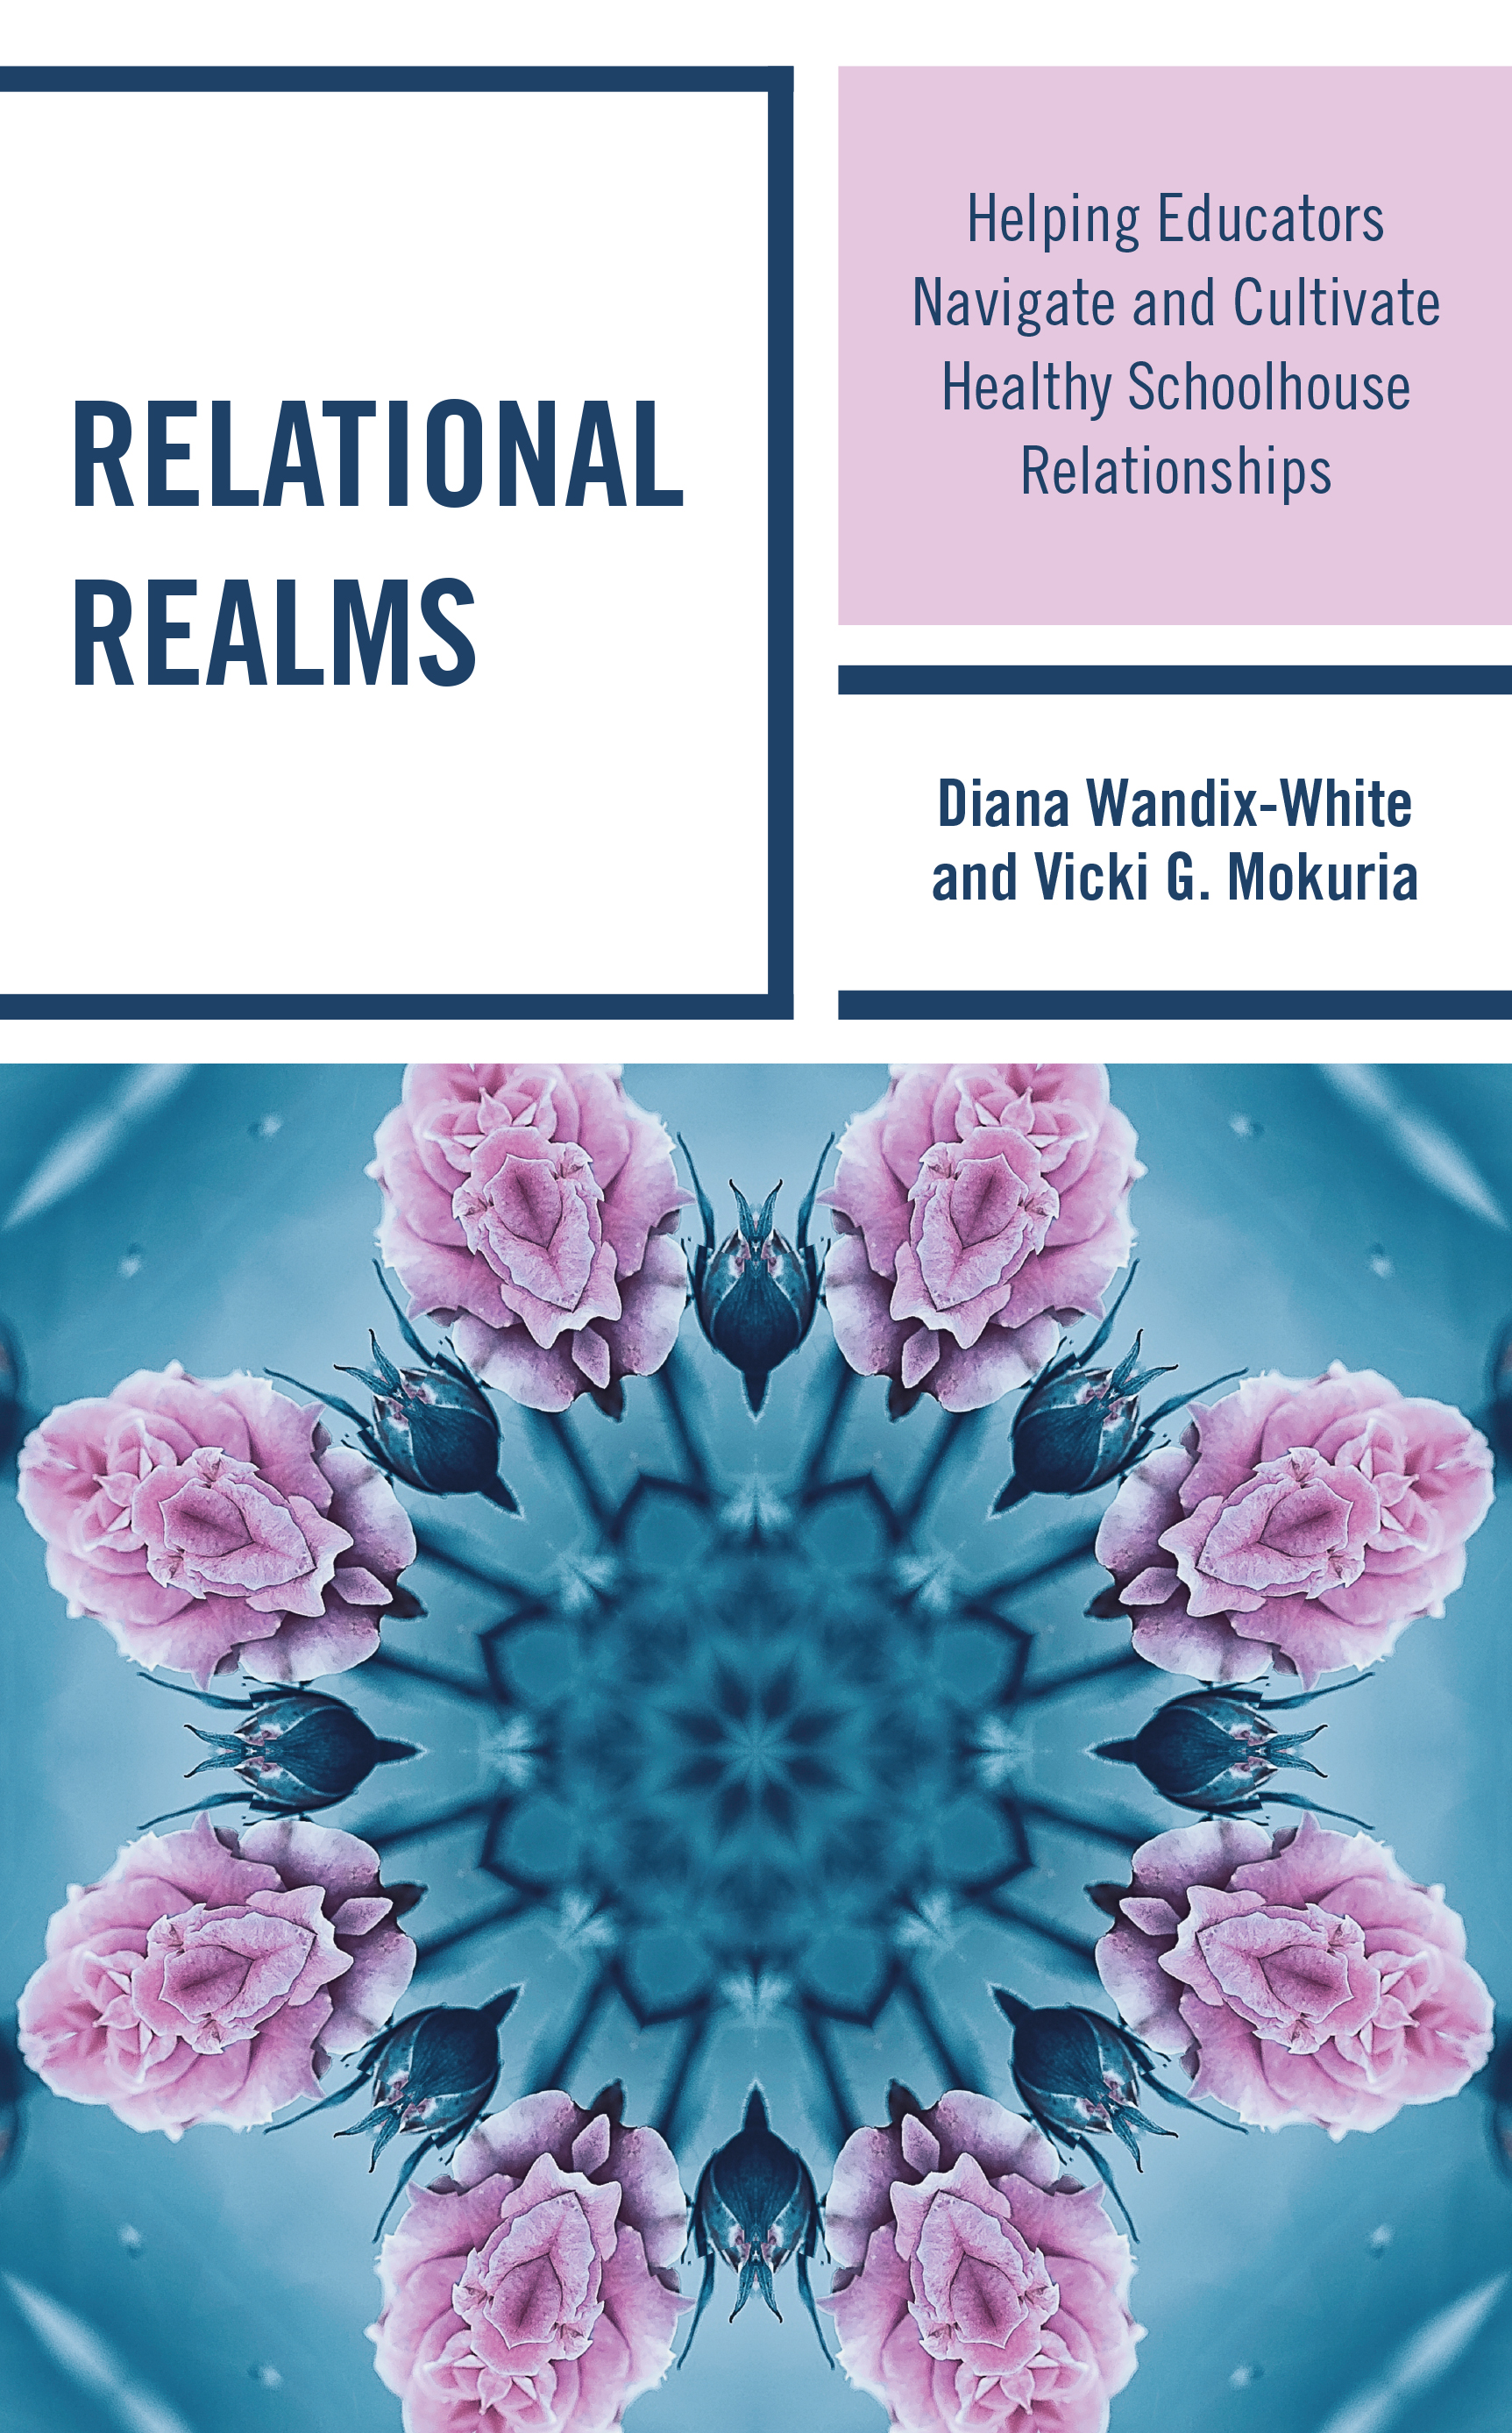 Relational Realms: Helping Educators Navigate and Cultivate Healthy Schoolhouse Relationships